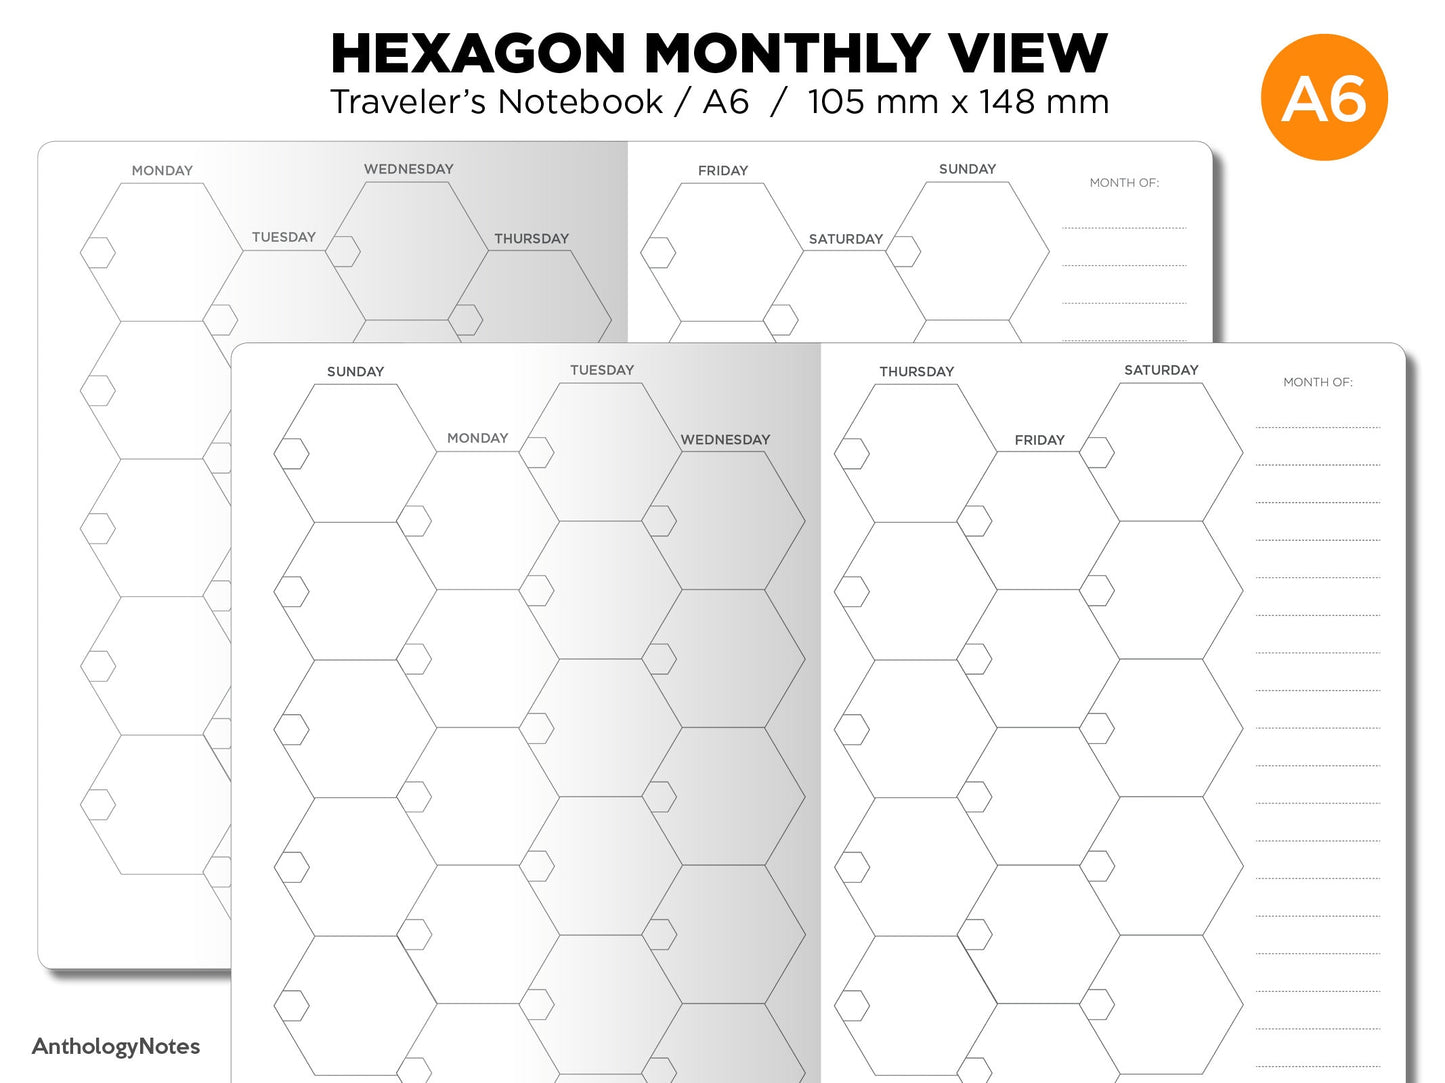 A6 HEXAGON Monthly Traveler's Notebook Printable Insert Mo2P CREATIVE Visual Planning